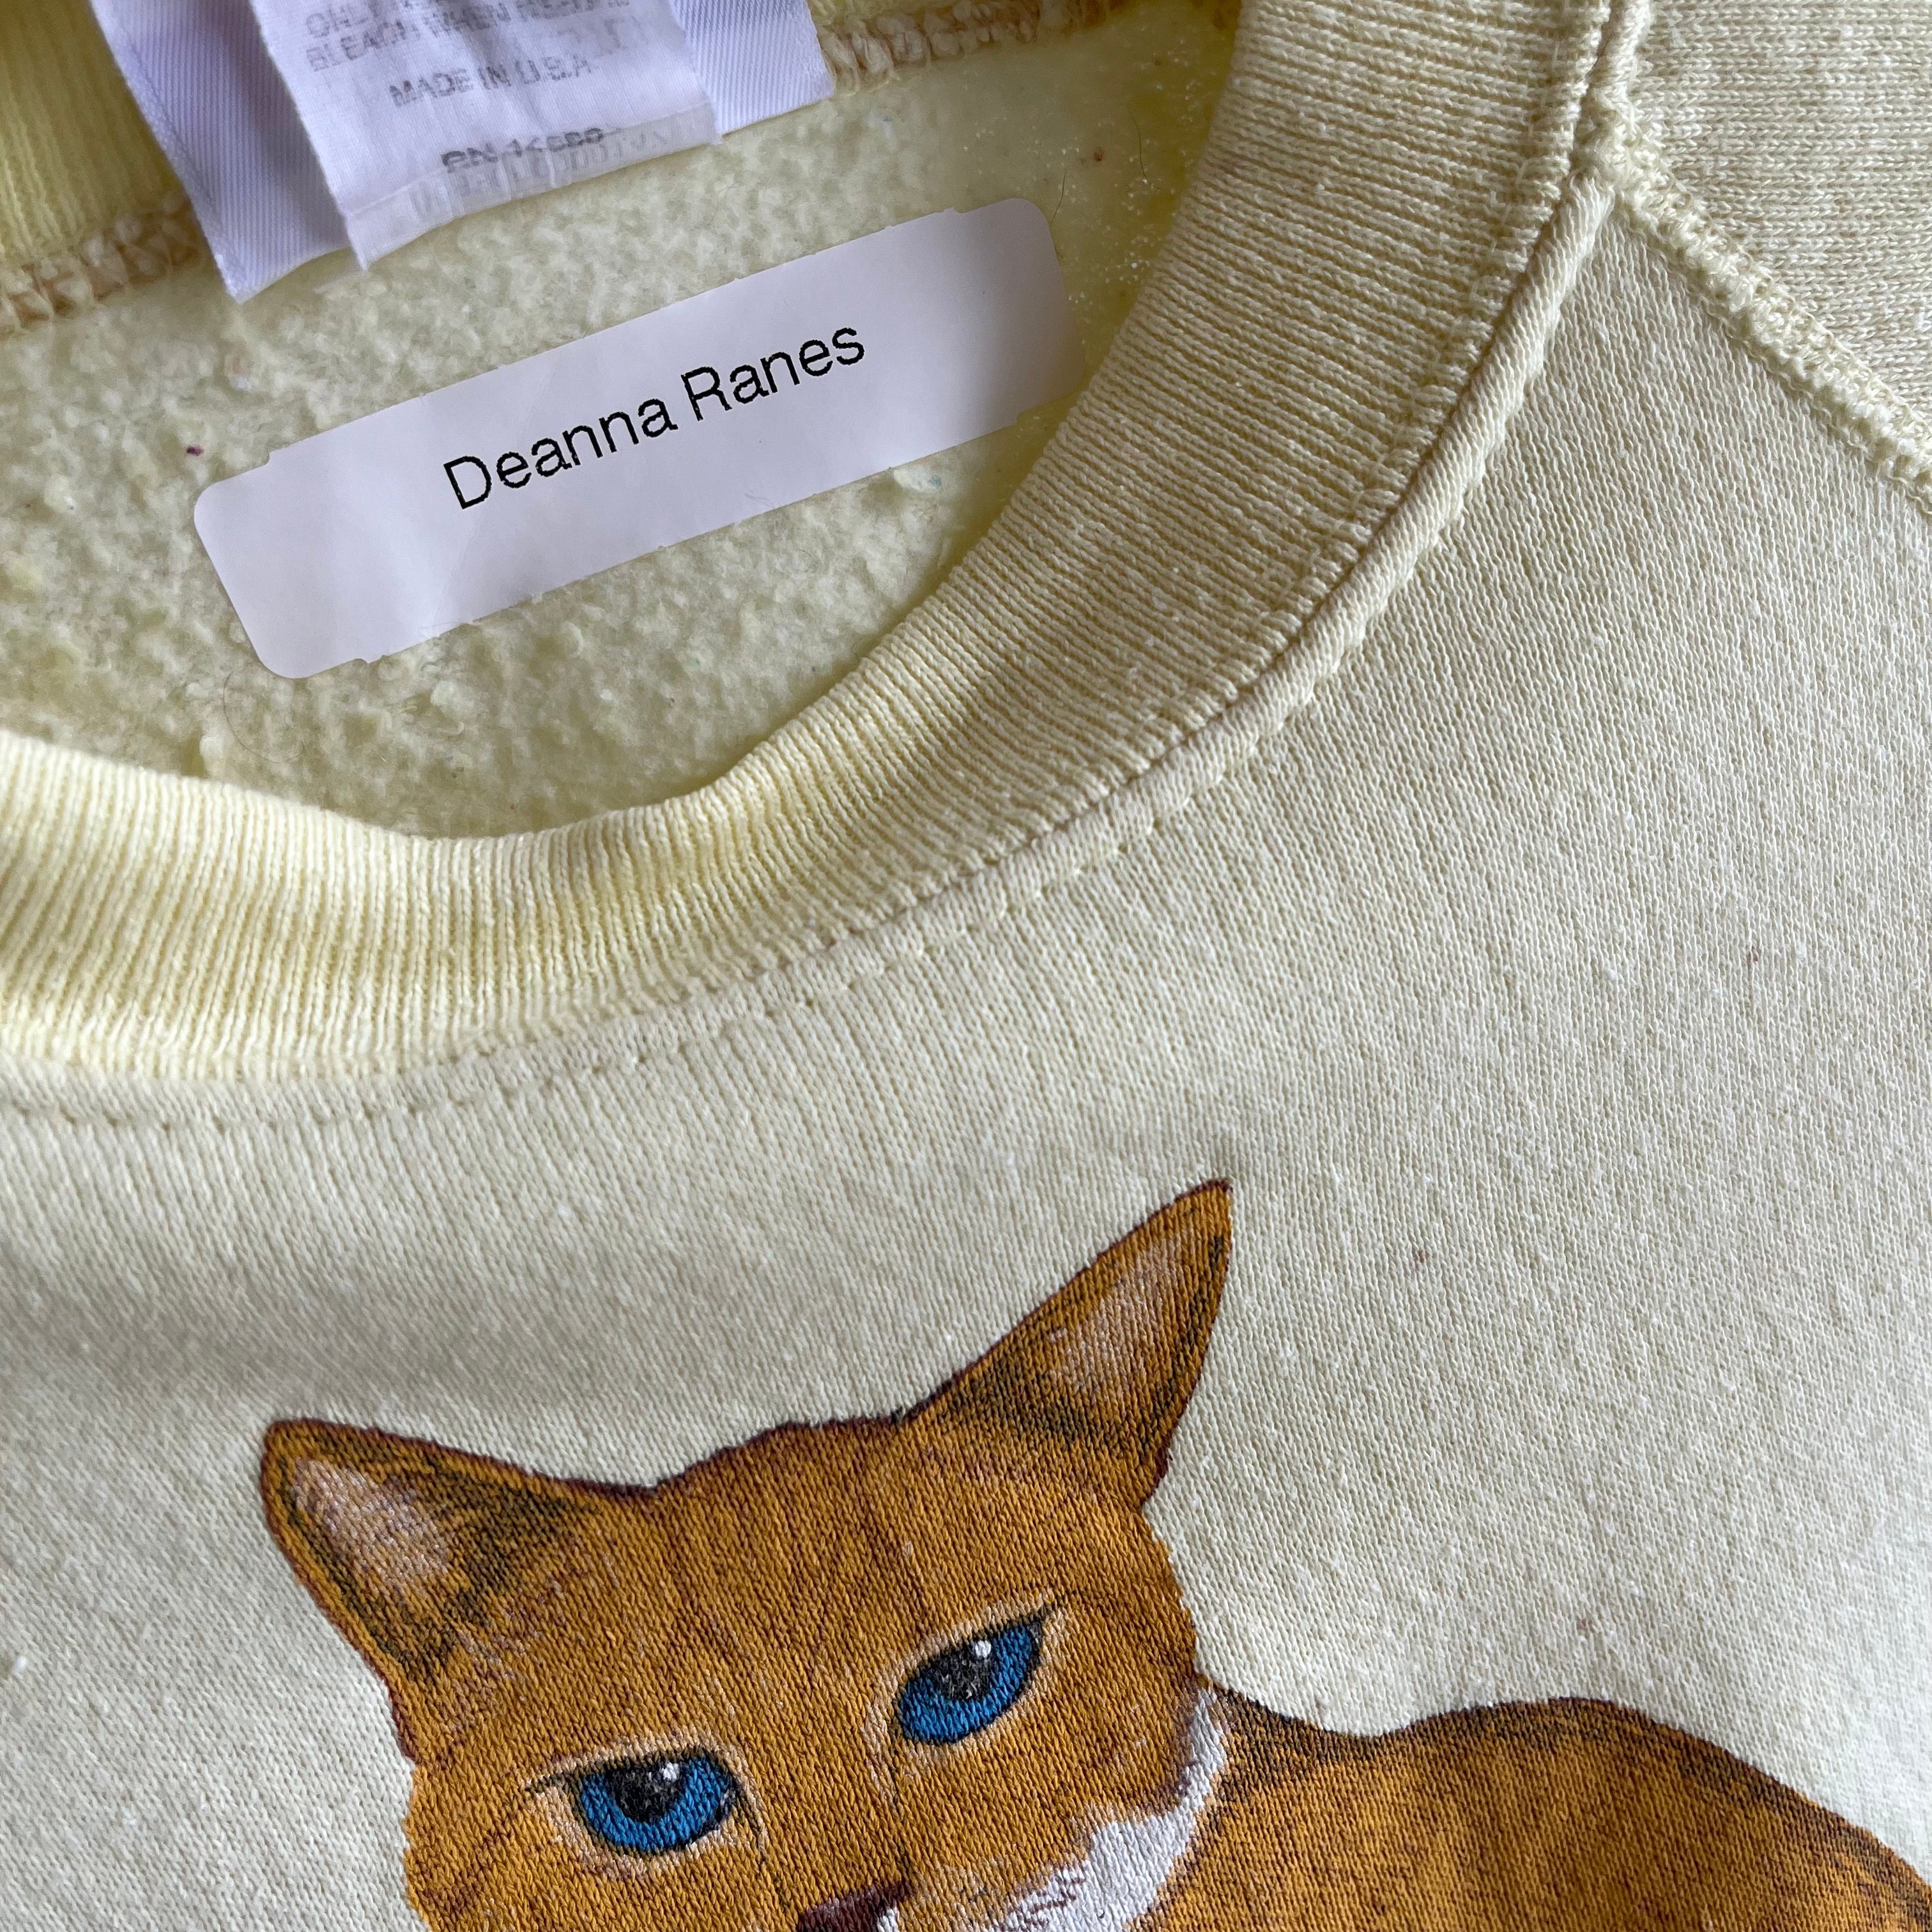 1980s DIY Cat T-Shirt, You're Welcome